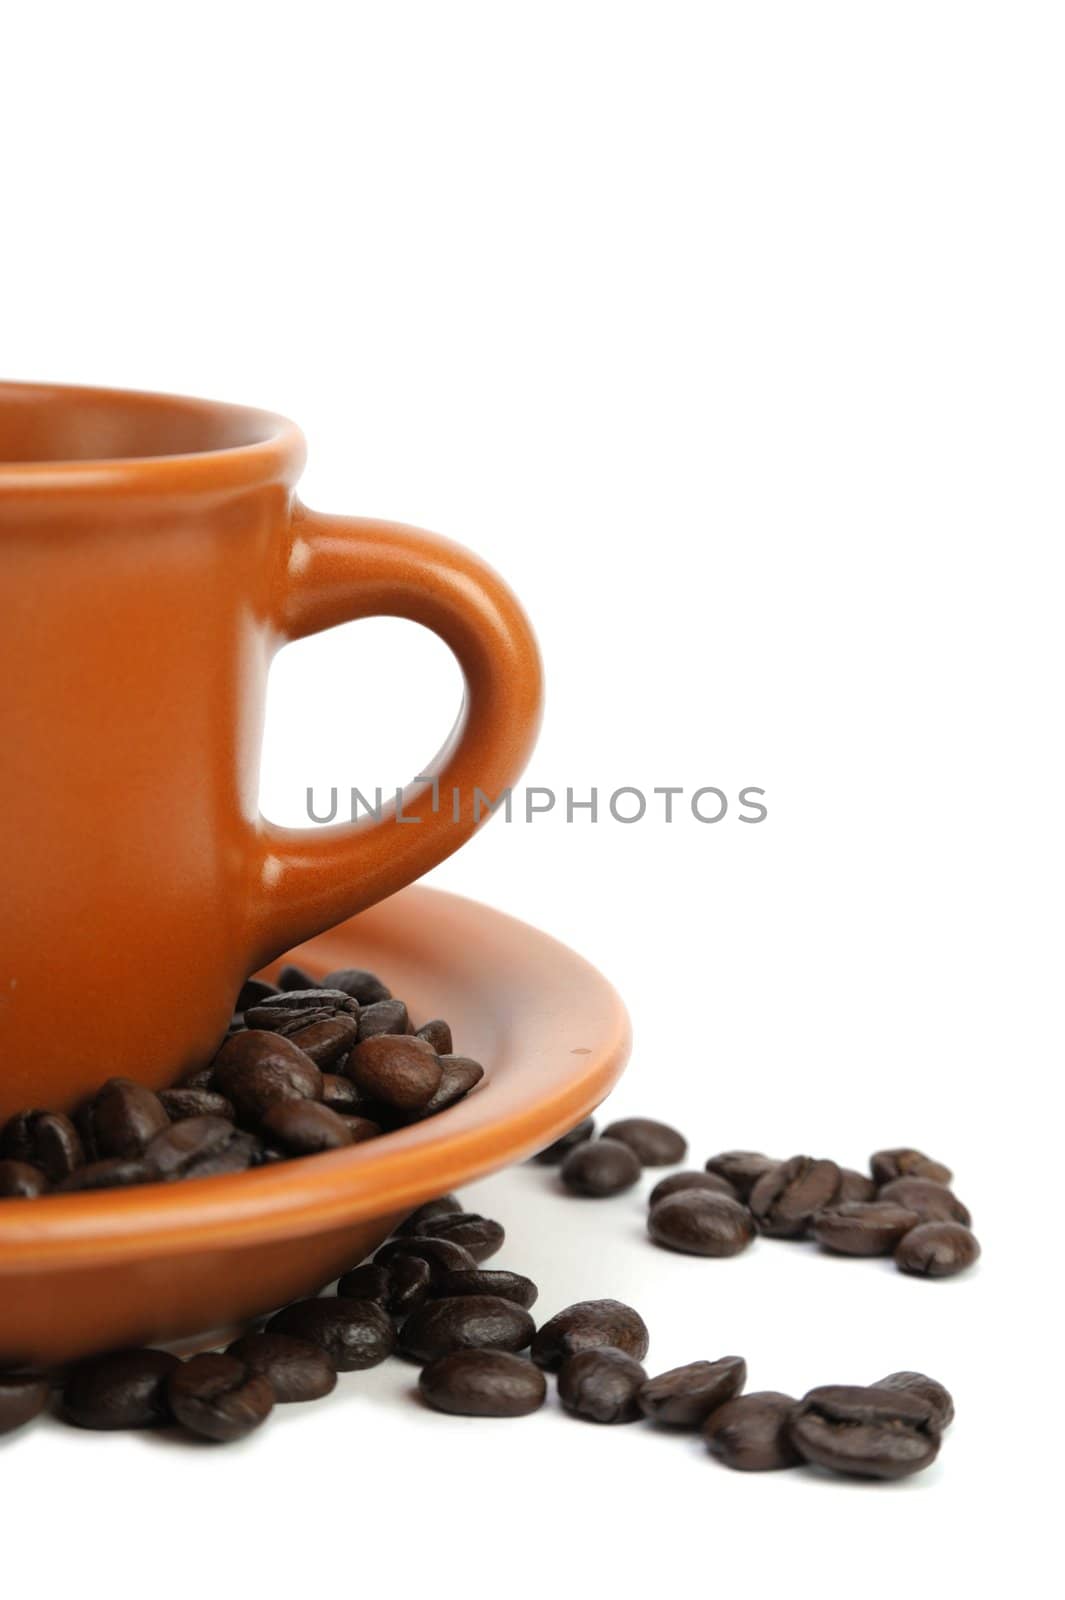 An image of a cup and a saucer with coffee bean